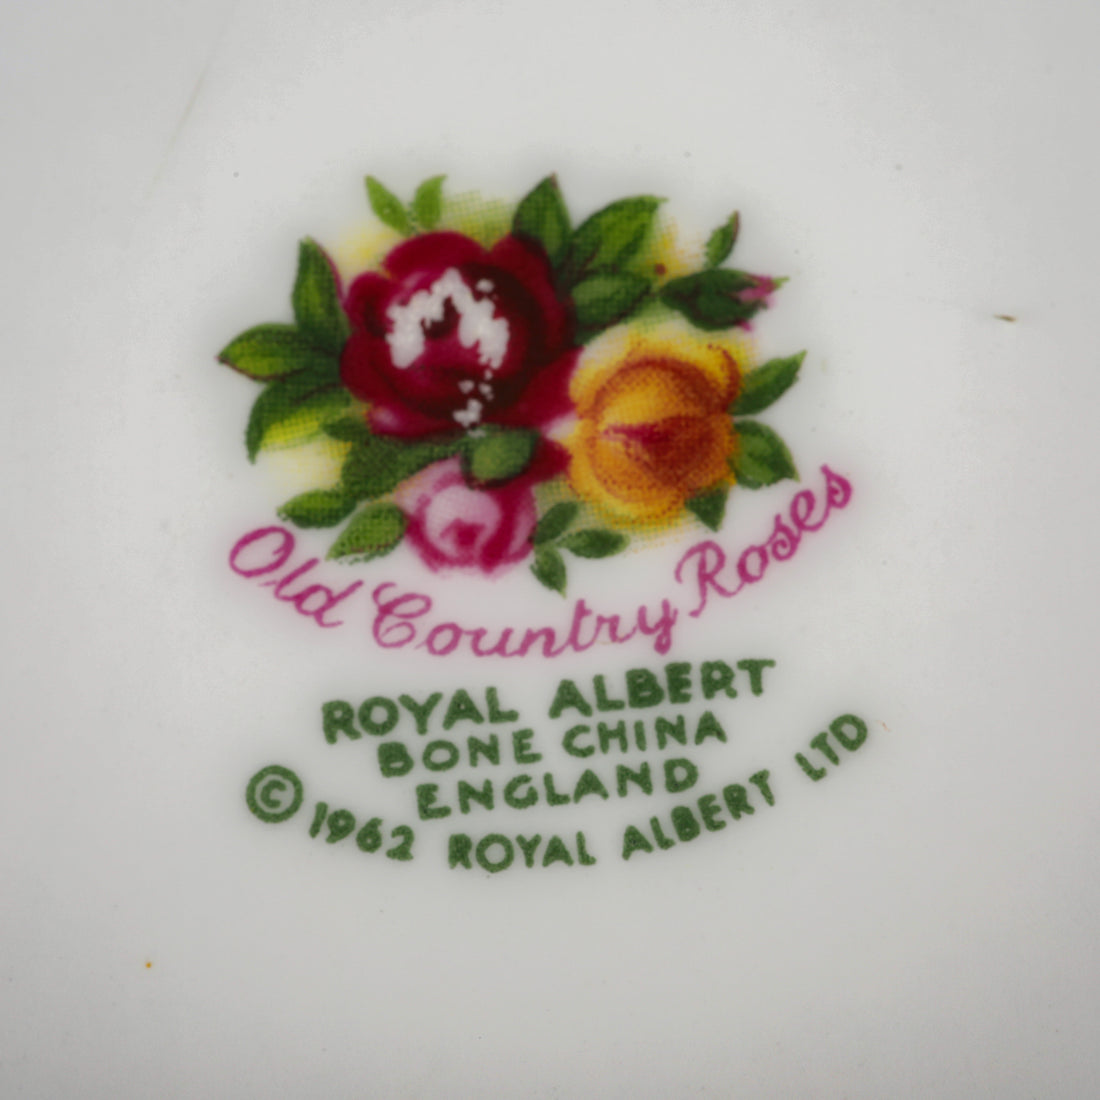 ROYAL ALBERT Old Country Roses Footed Cake Plate